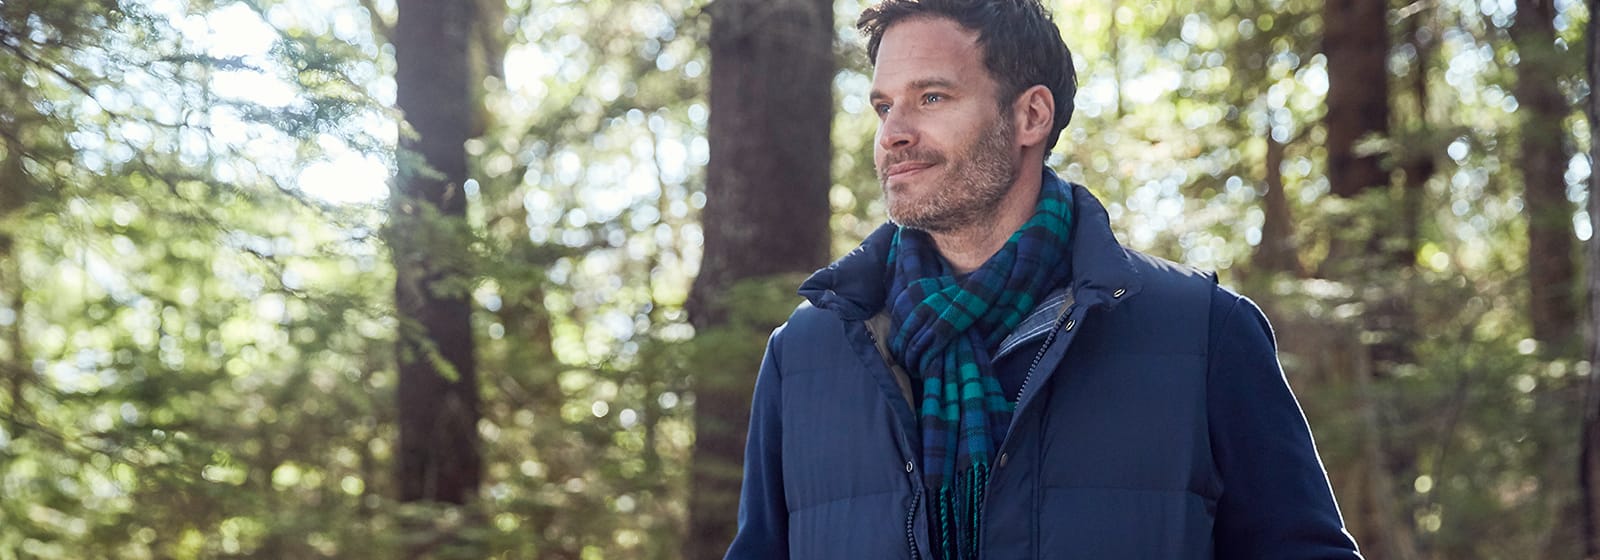 5 Men's Winter Accessories Every Guy Should Have